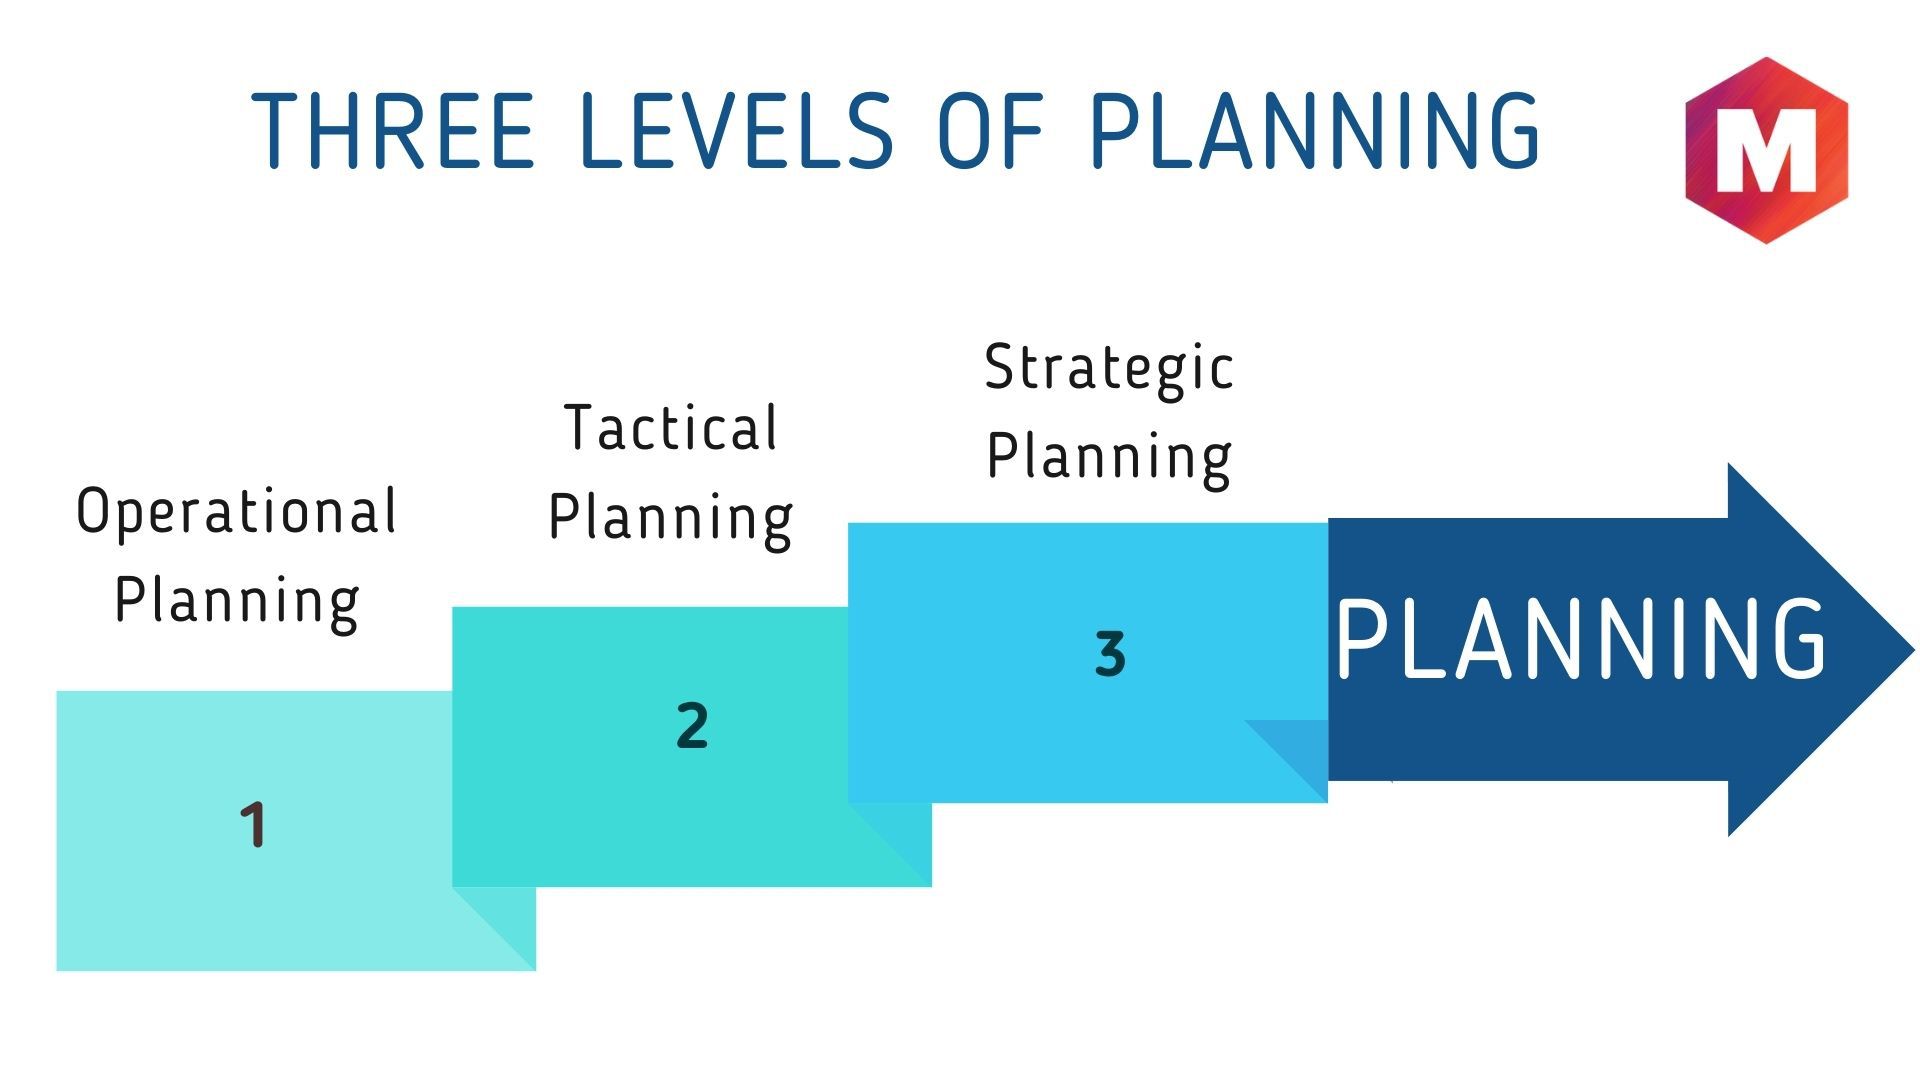 define planning and why we need planning in business management